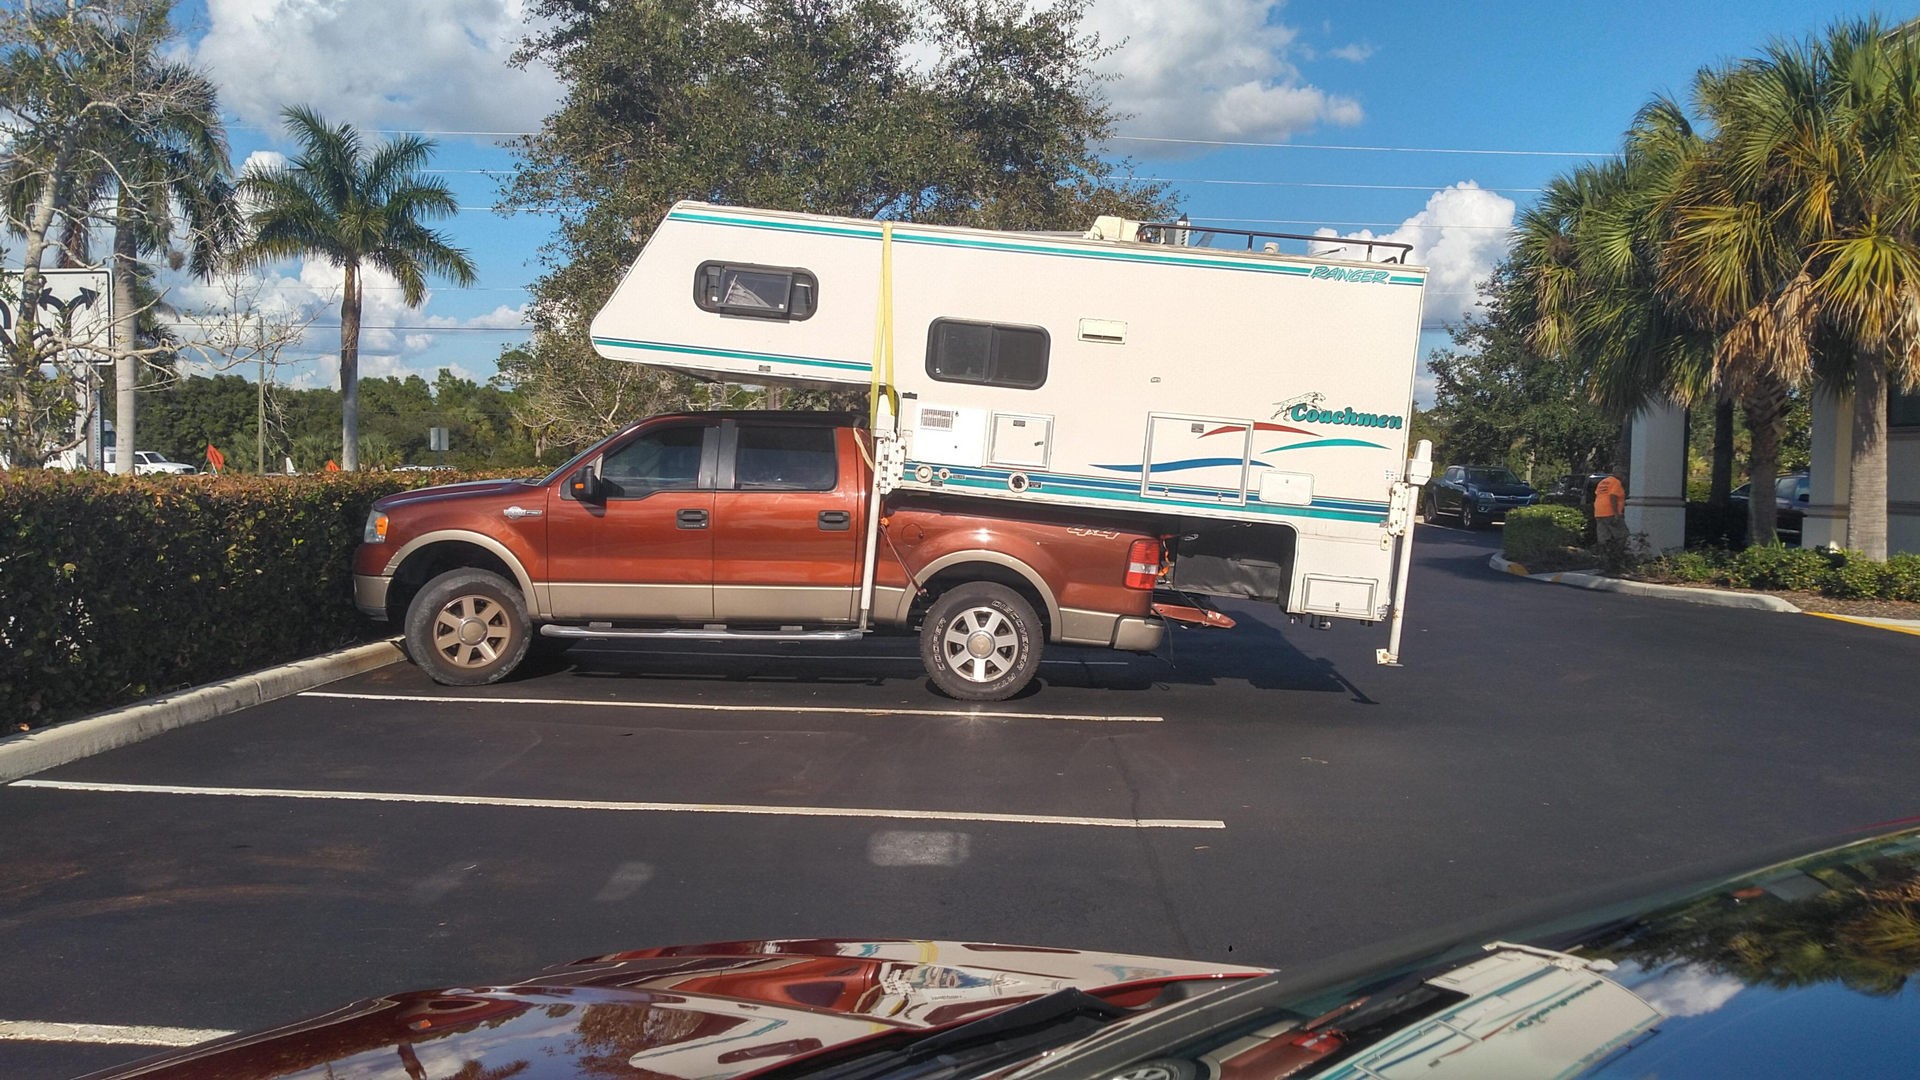 bent-janky-ford-f-150-camper-has-been-defying-physics-for-years-in-florida_2.jpg